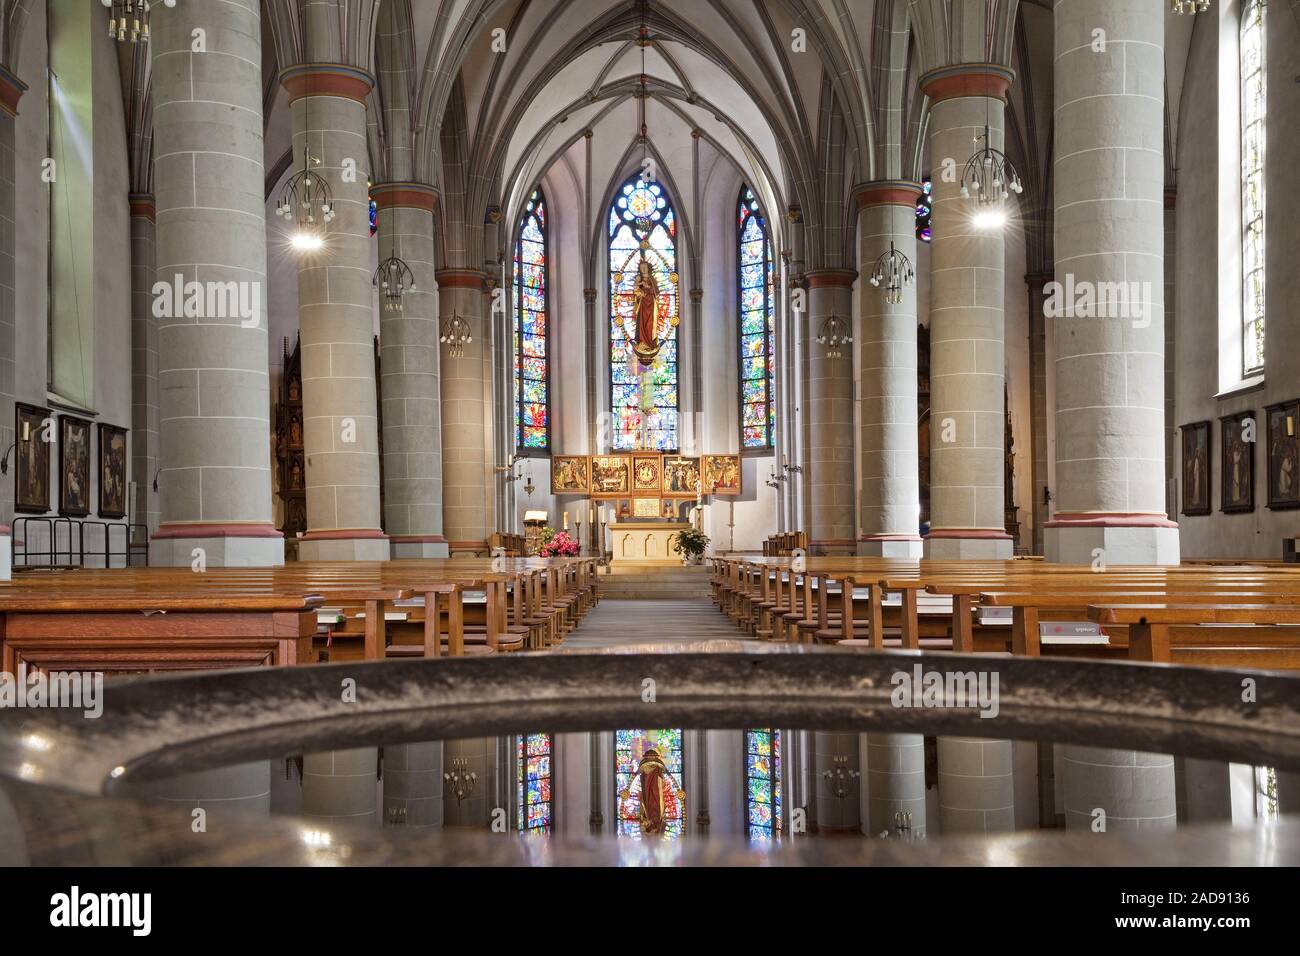 St. Peter and Paul church, inside view, Bochum, Ruhr Area, North Rhine-Westphalia, Germany, Europe Stock Photo